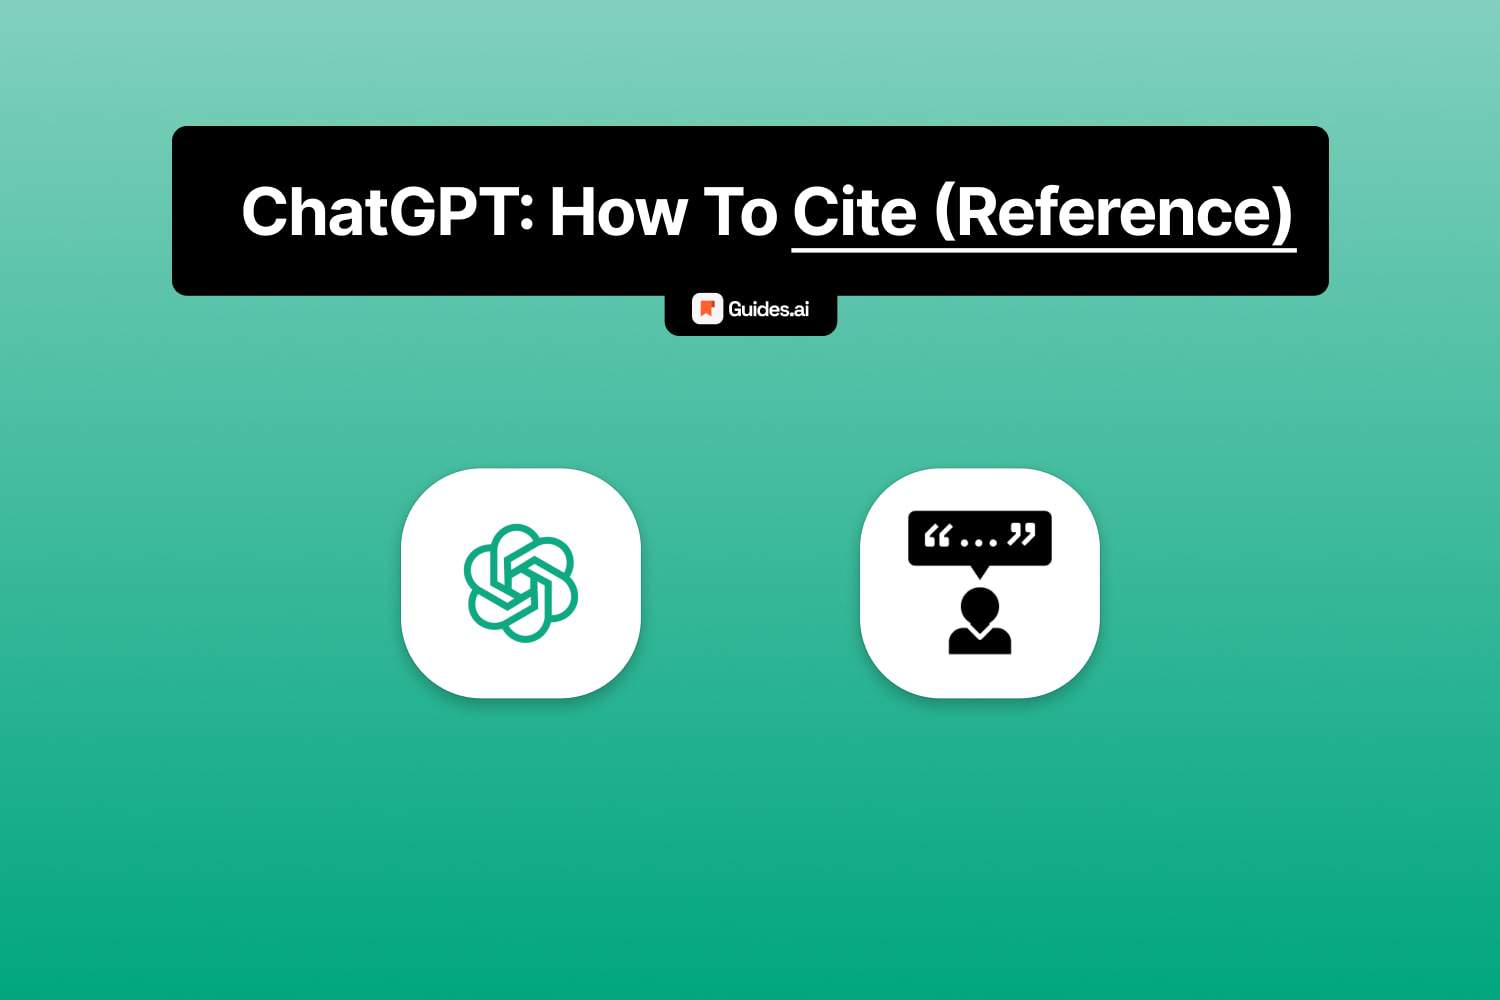 How to cite ChatGPT